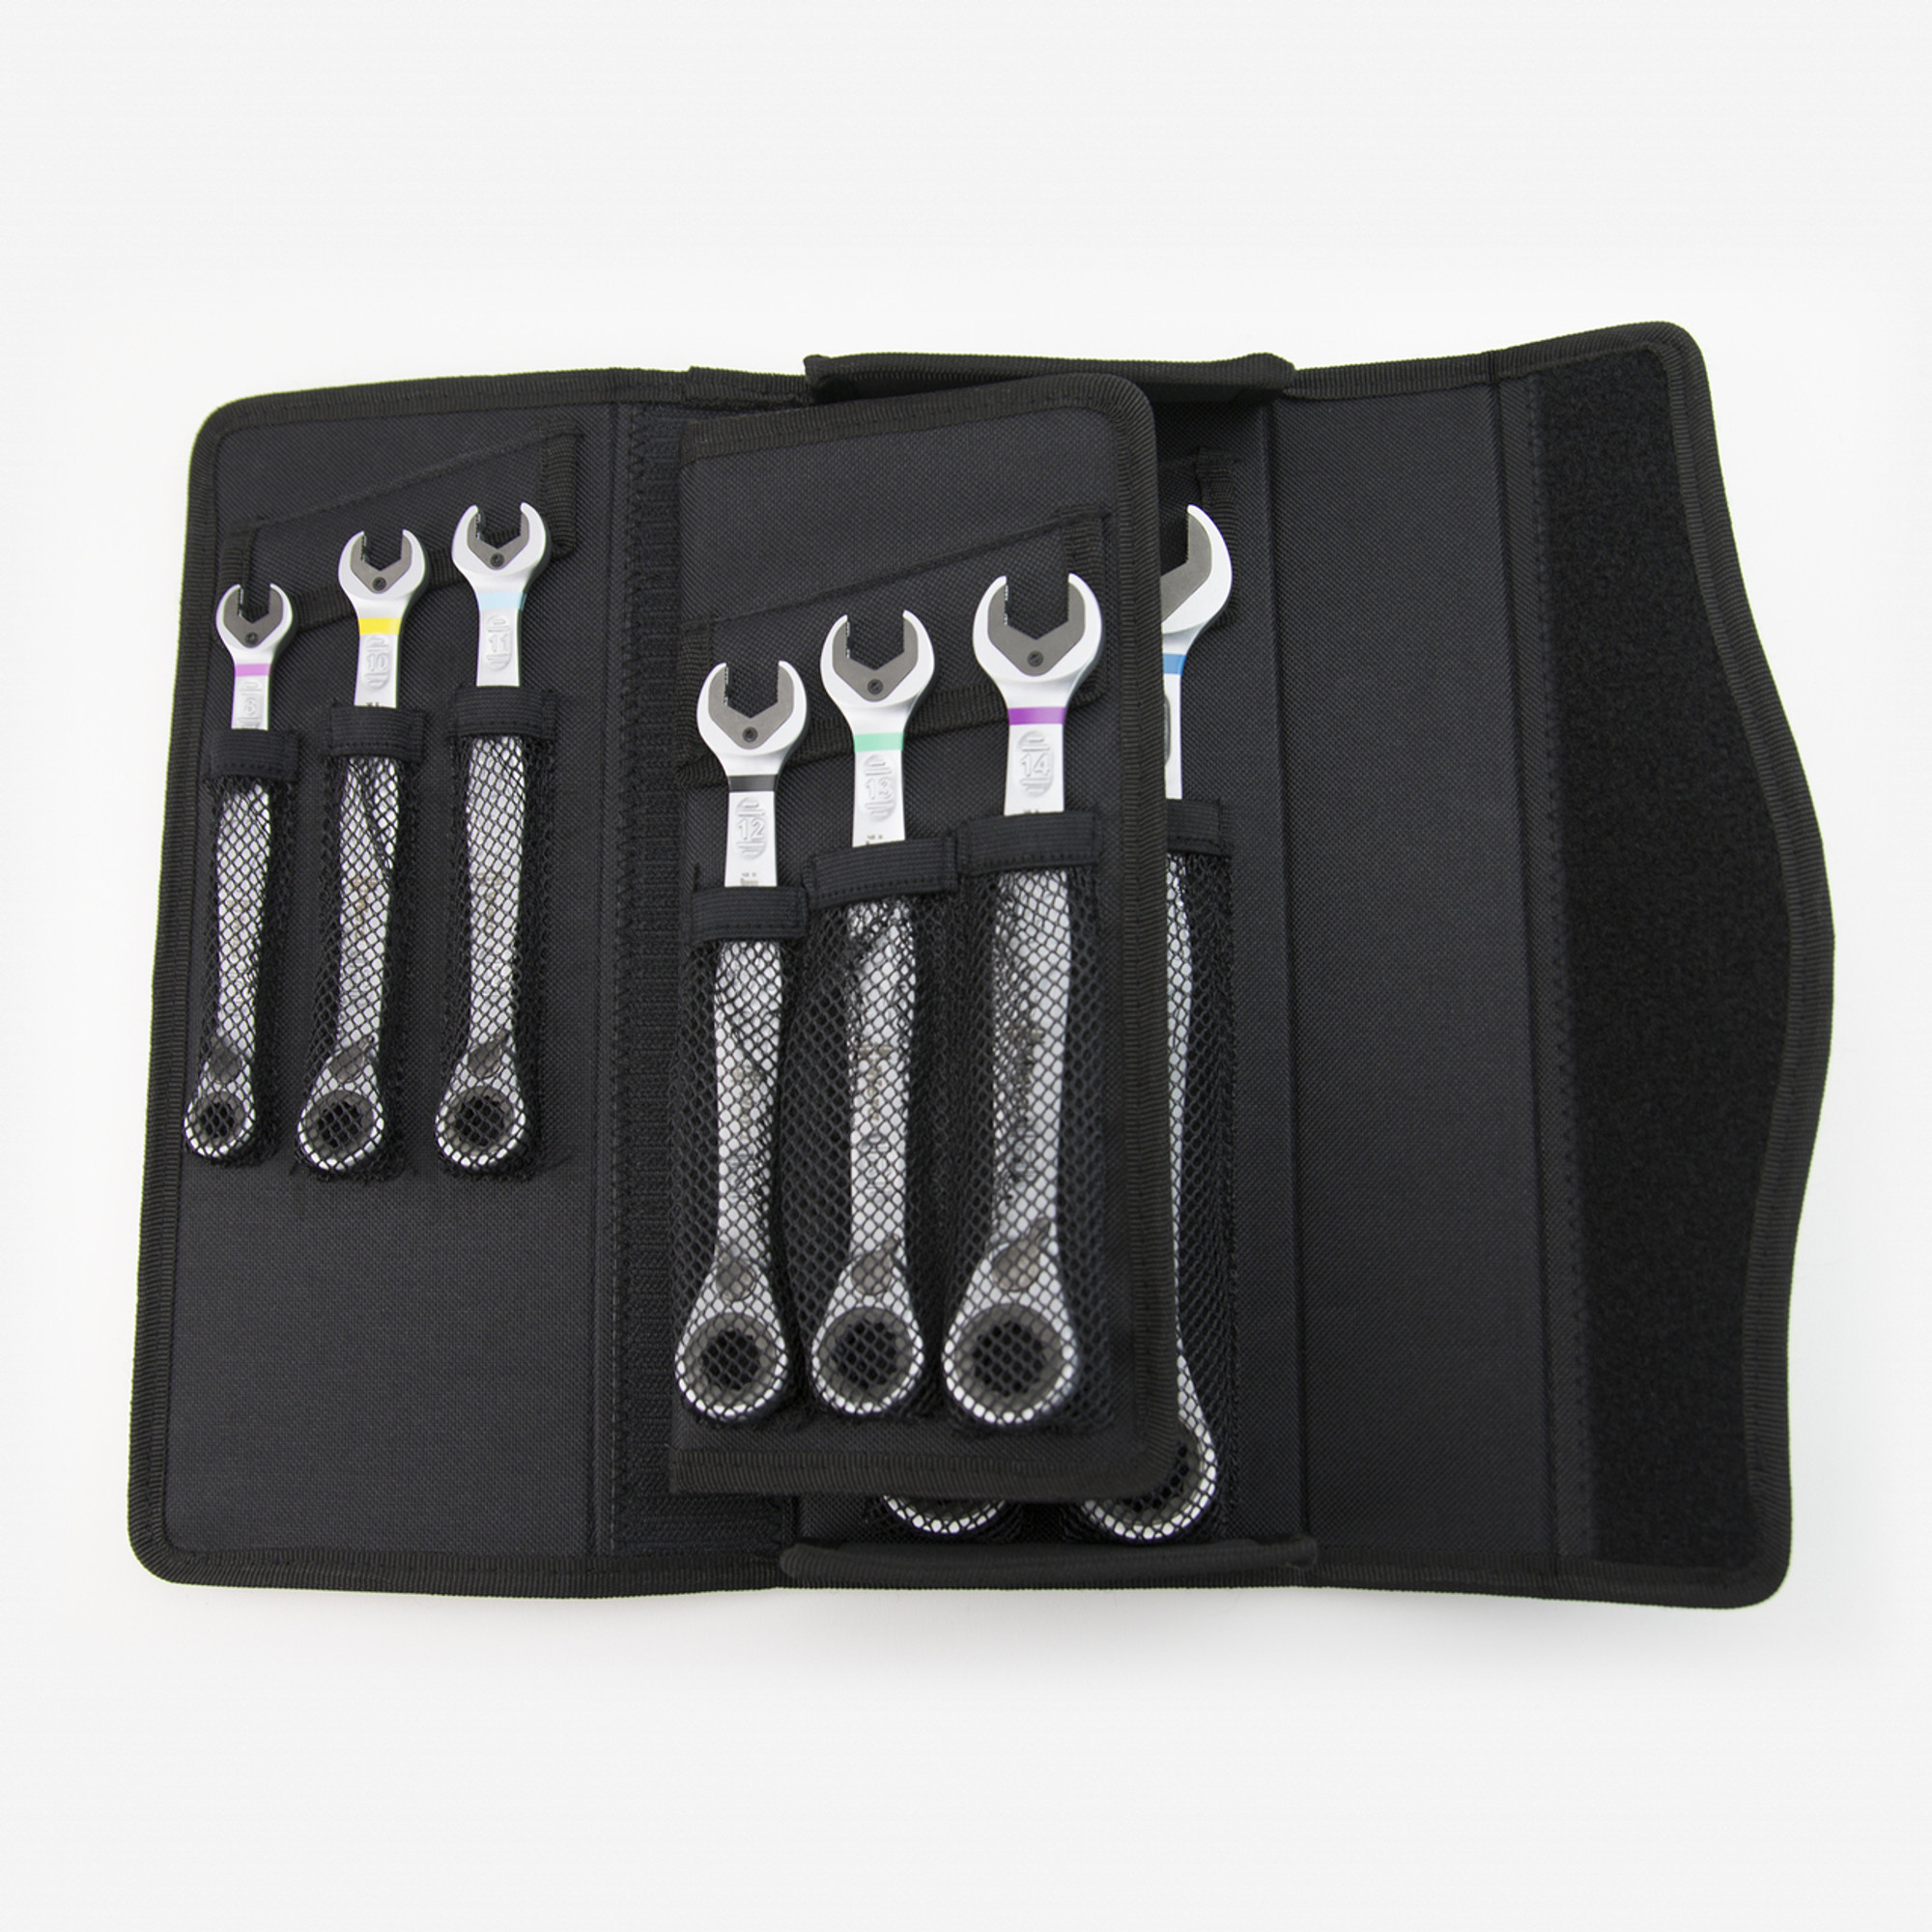 Wera 020091 Joker Combination Wrench Pouch Set with Switch - 11 Piece Metric